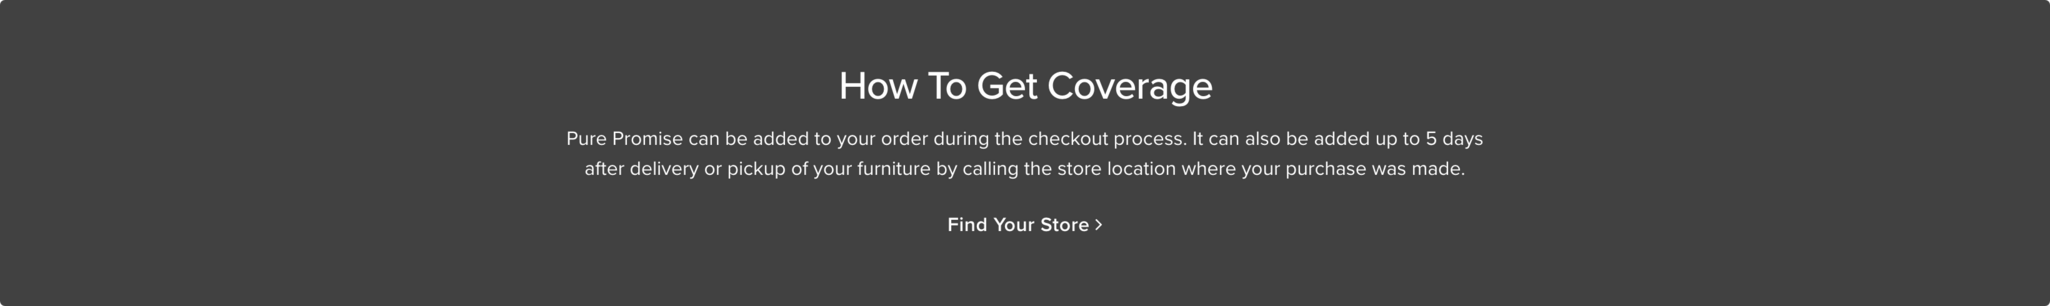 How To Get Coverage Pure promise can be added to your order during the checkout process. It can also be added up to 5 days after delivery or pickup of your furniture by calling the store location where your purchase was made Find your Store >